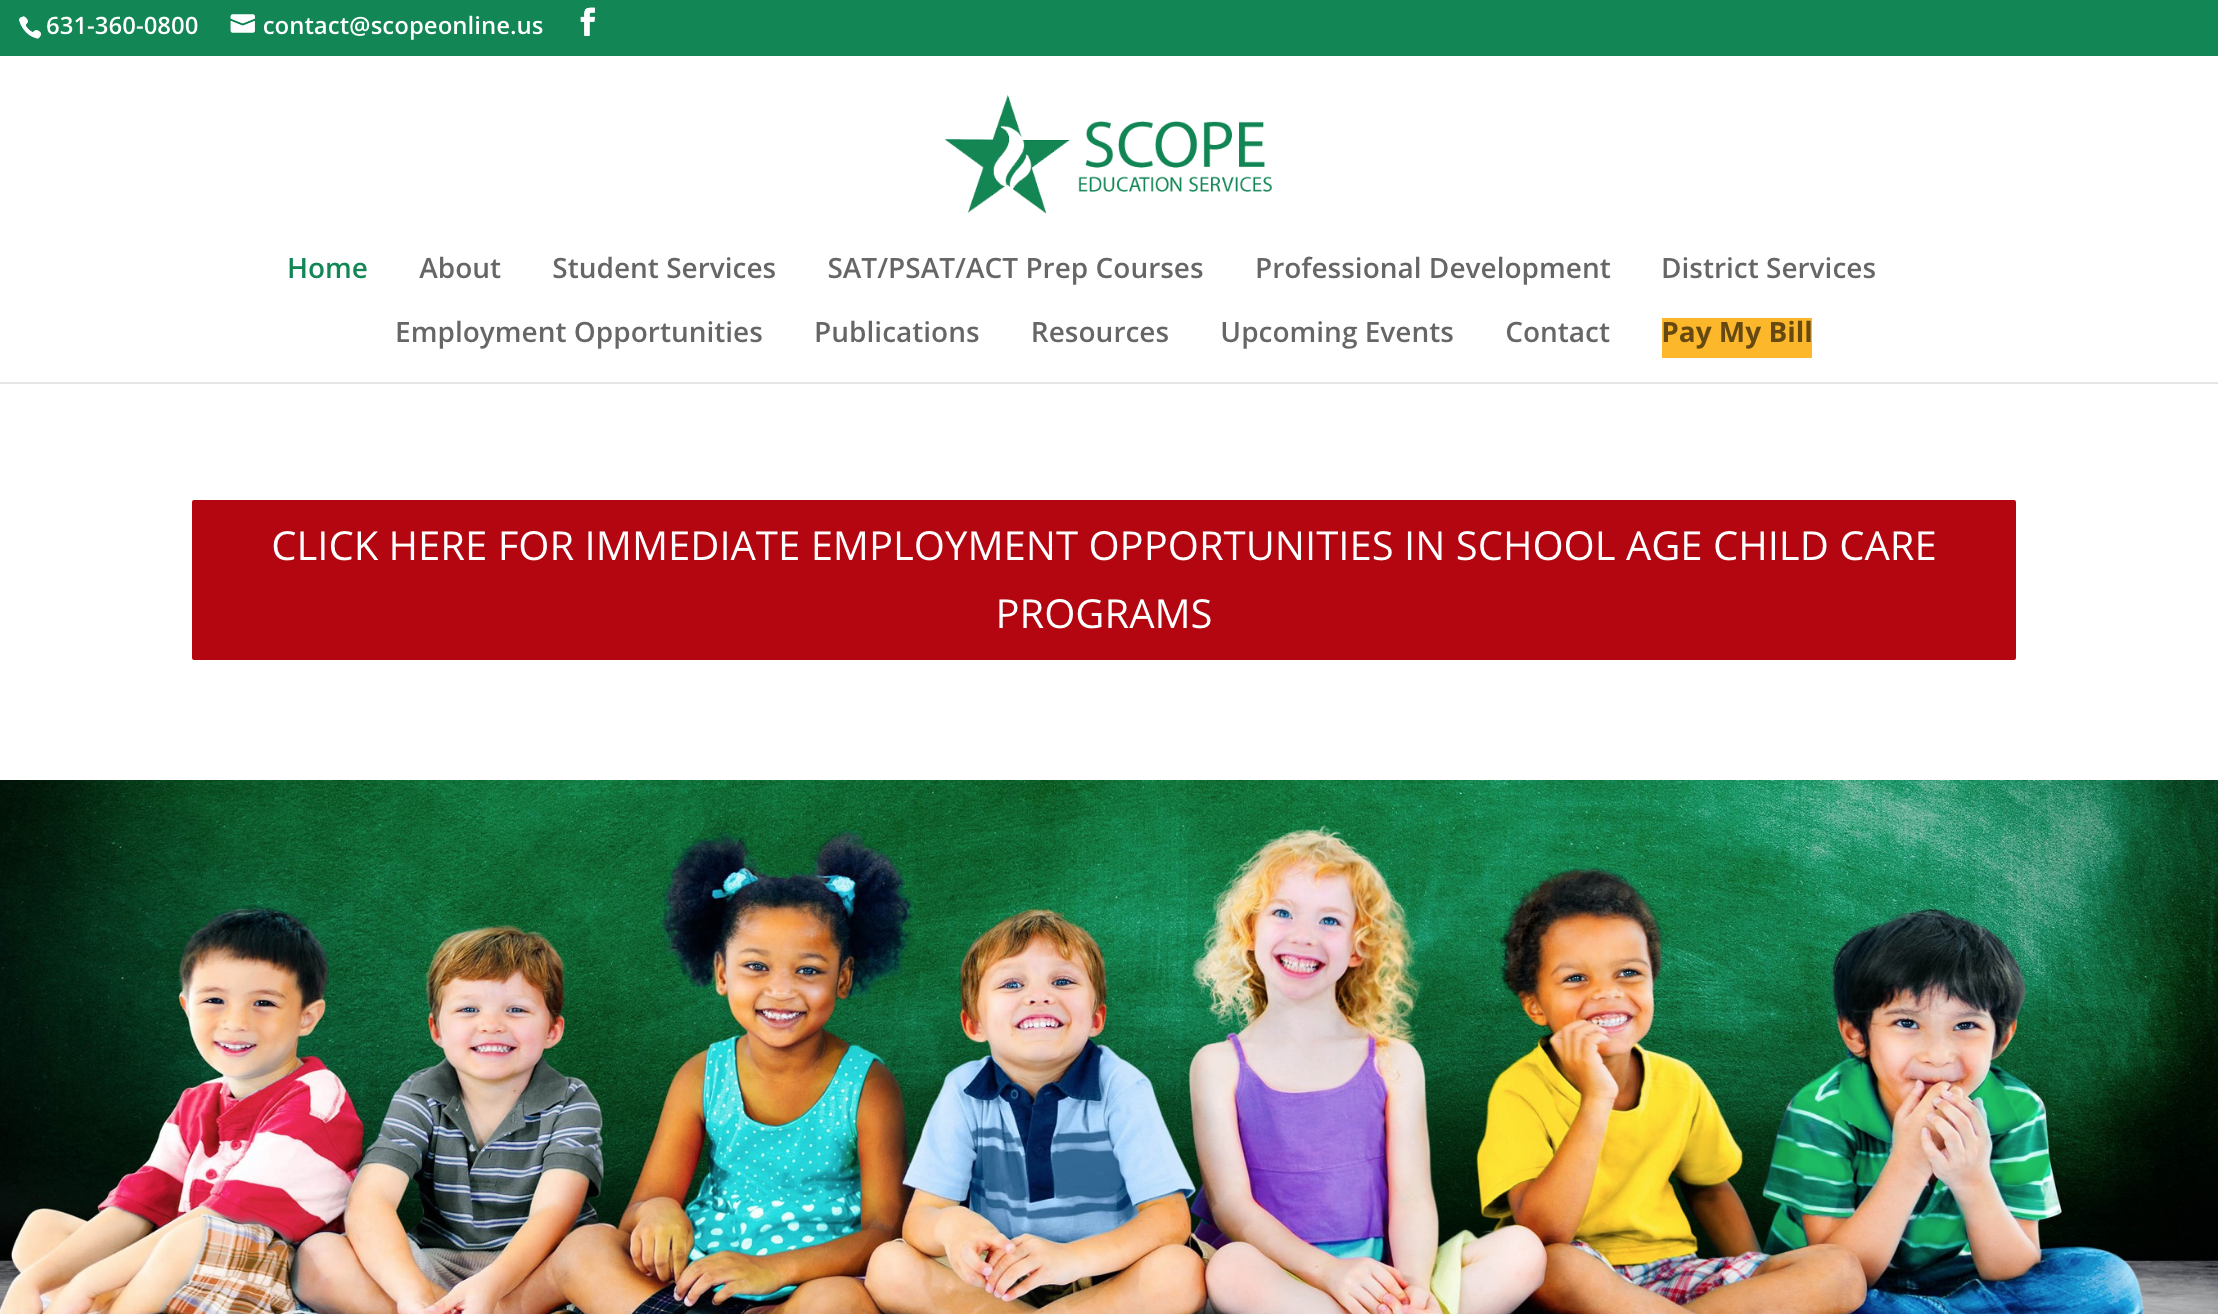 A screenshot of the SCOPE Education Services homepage, published to: "Web Design, WordPress, SEO, Writing, and Graphic Design for SCOPE Education Services"